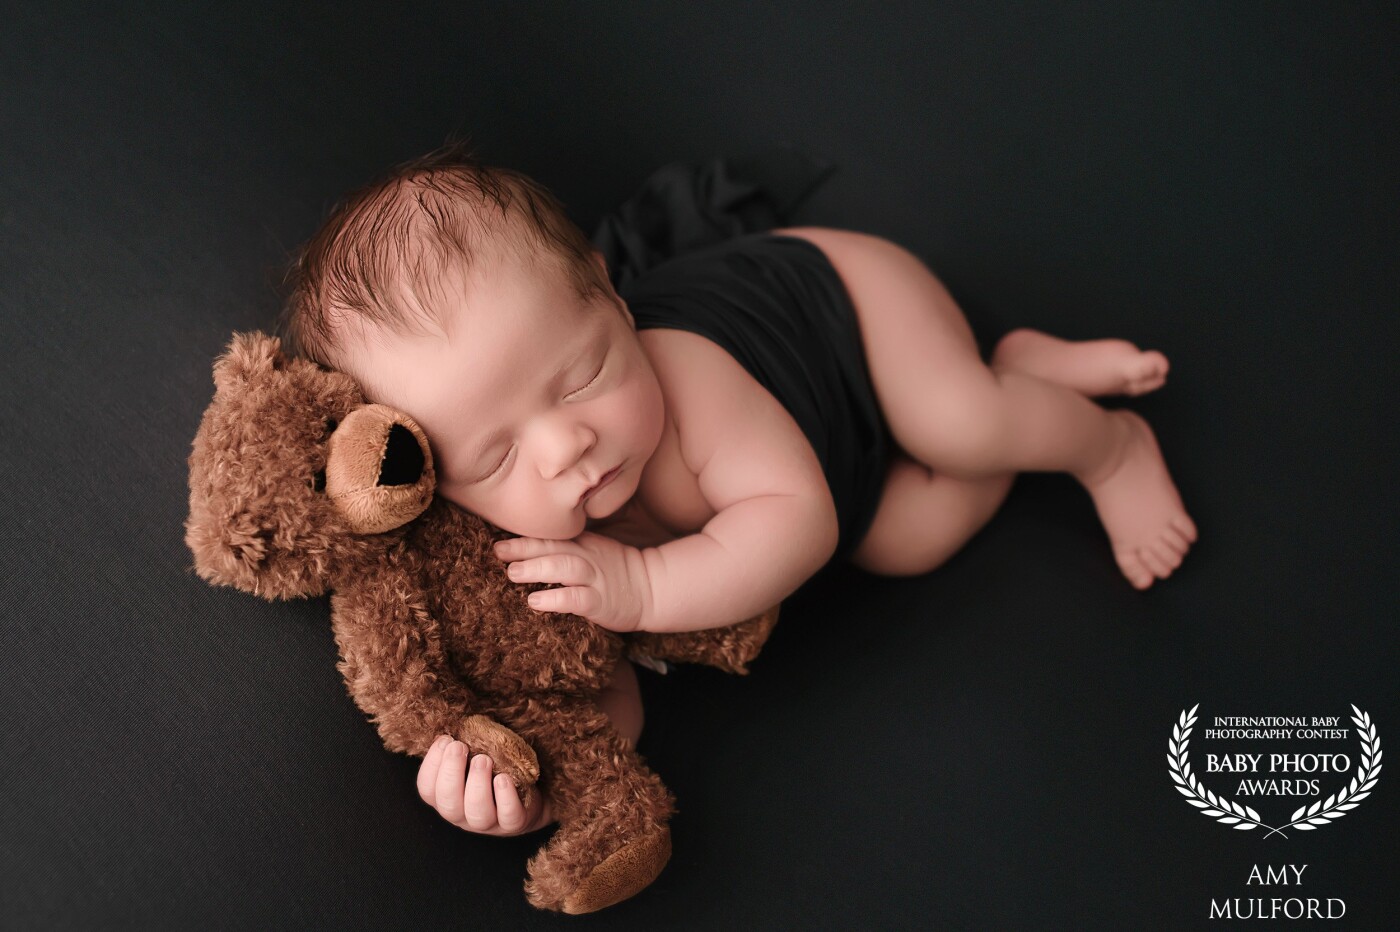 Boston here is a rainbow baby. His big brother passed away at just one day old. Boston came to me for his rainbow baby newborn session and wasn't a big fan of me posing him. Mom brought along this little teddy bear that belonged to his brother and as soon as I laid it next to him, he snuggled right up and fell fast asleep. I know mom and dad will treasure this image forever. 